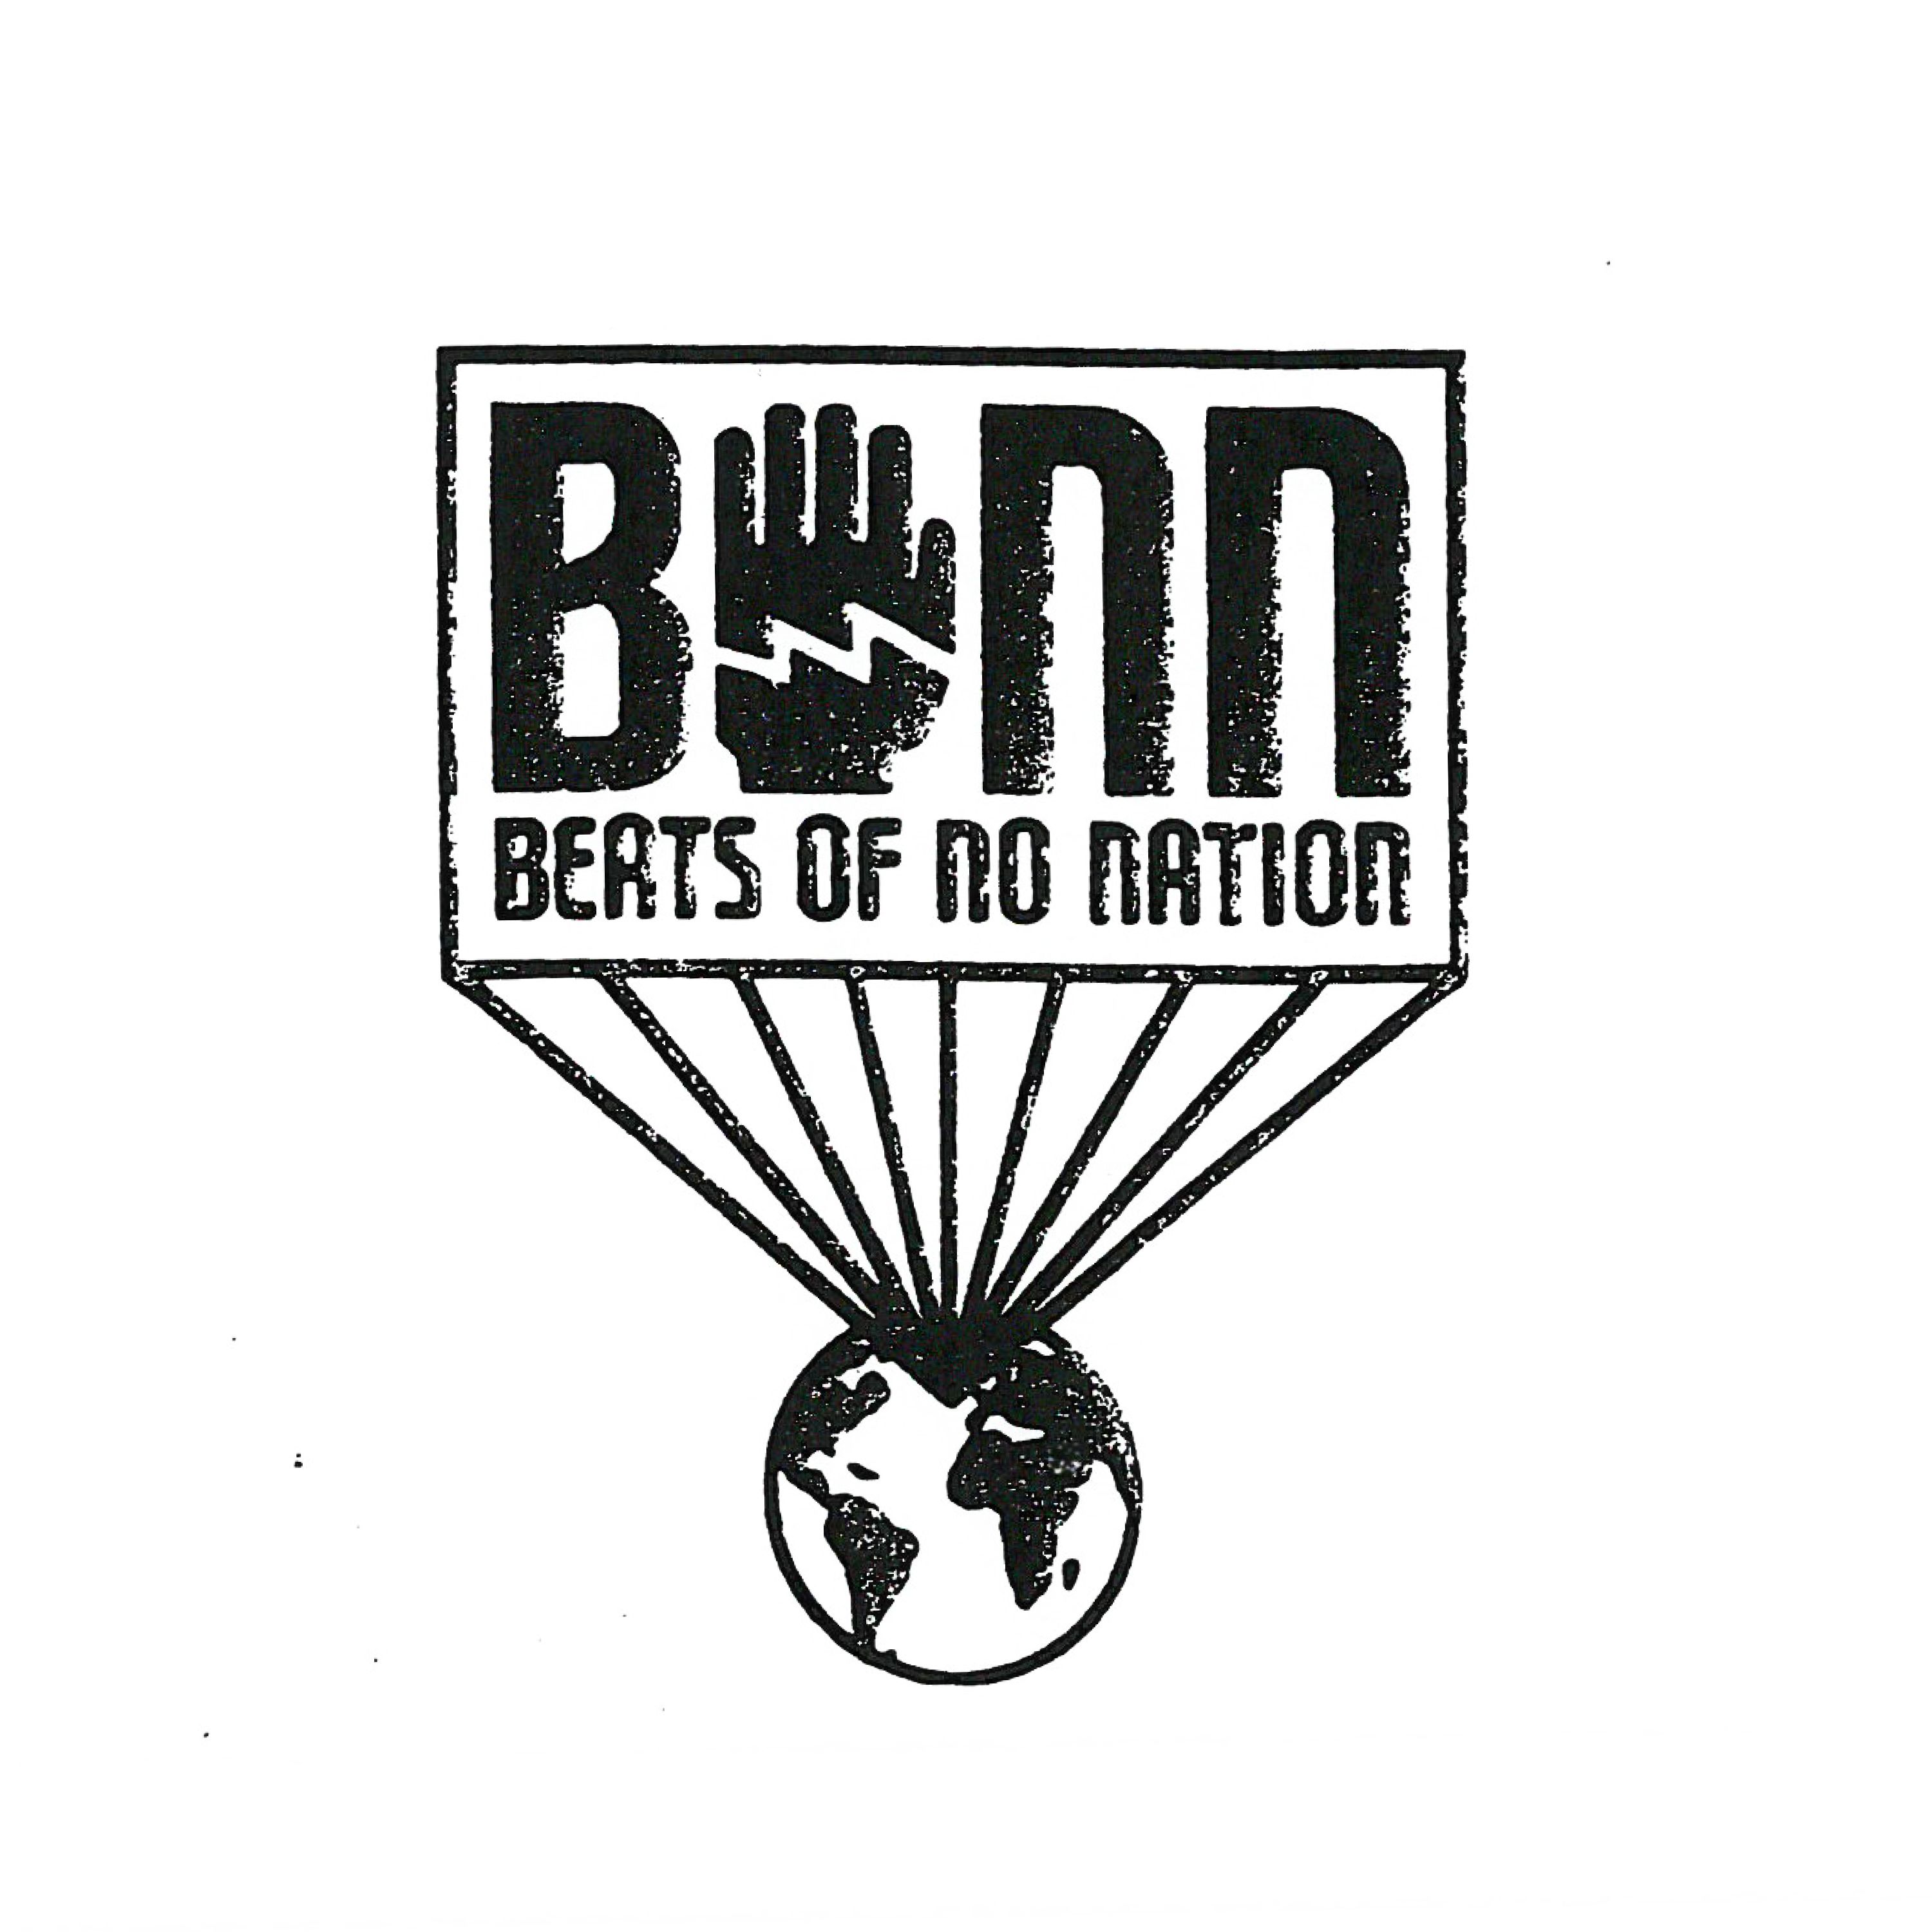 Stream BEATS OF NO NATION music | Listen to songs, albums, playlists for on SoundCloud